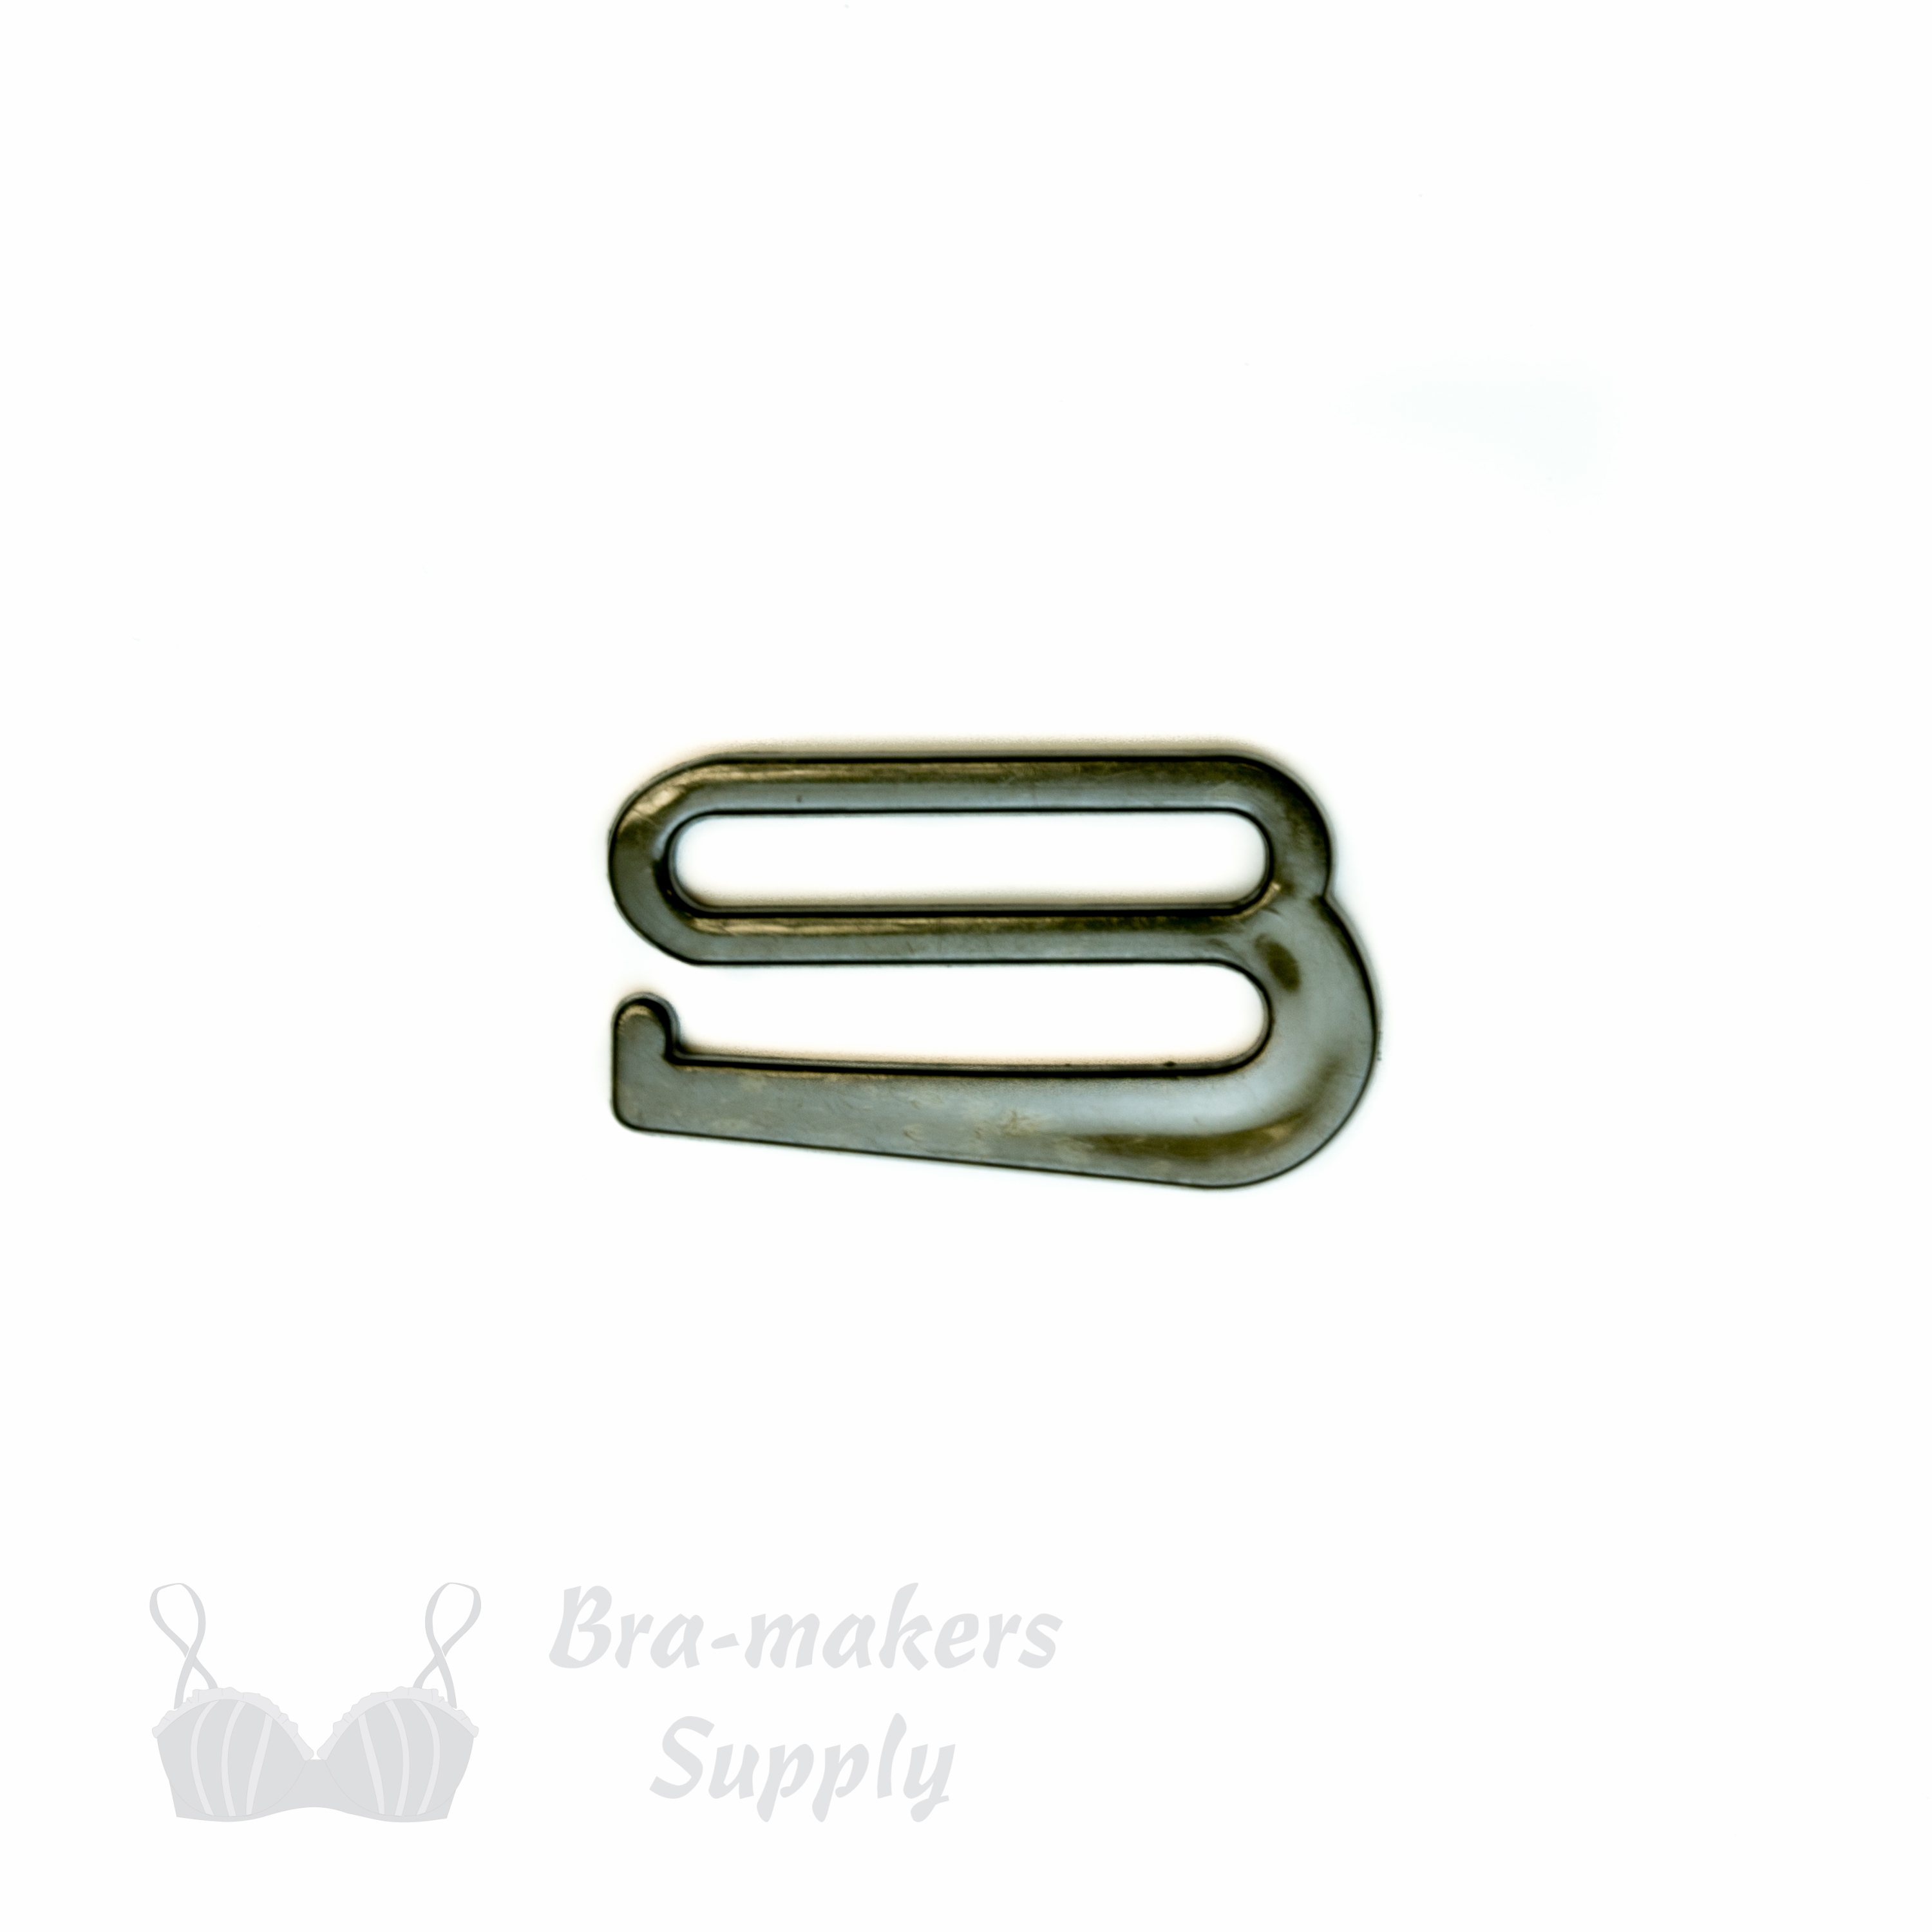 Swimwear Connectors Clips and Fasteners - Bra-makers Supply